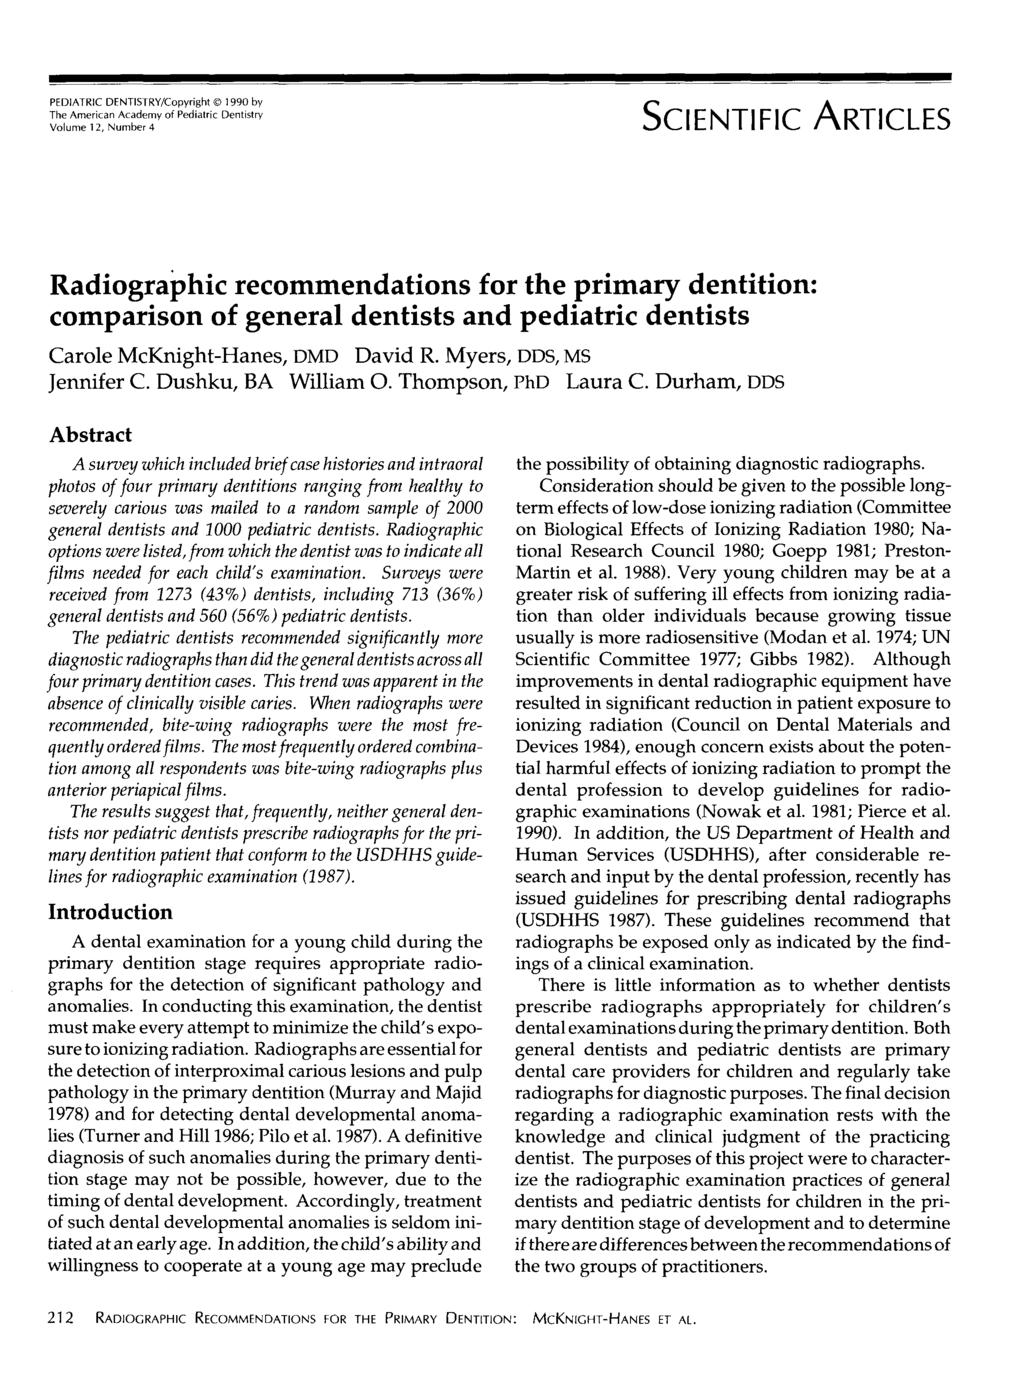 PEDIATRIC DENTISTRY/Copyright 0 1990 by The Volume American 1, Number Academy 4 of Pediatric Dentistry SCIENTIFIC ARTICLES Radiographic recommendations for the primary dentition: comparison of